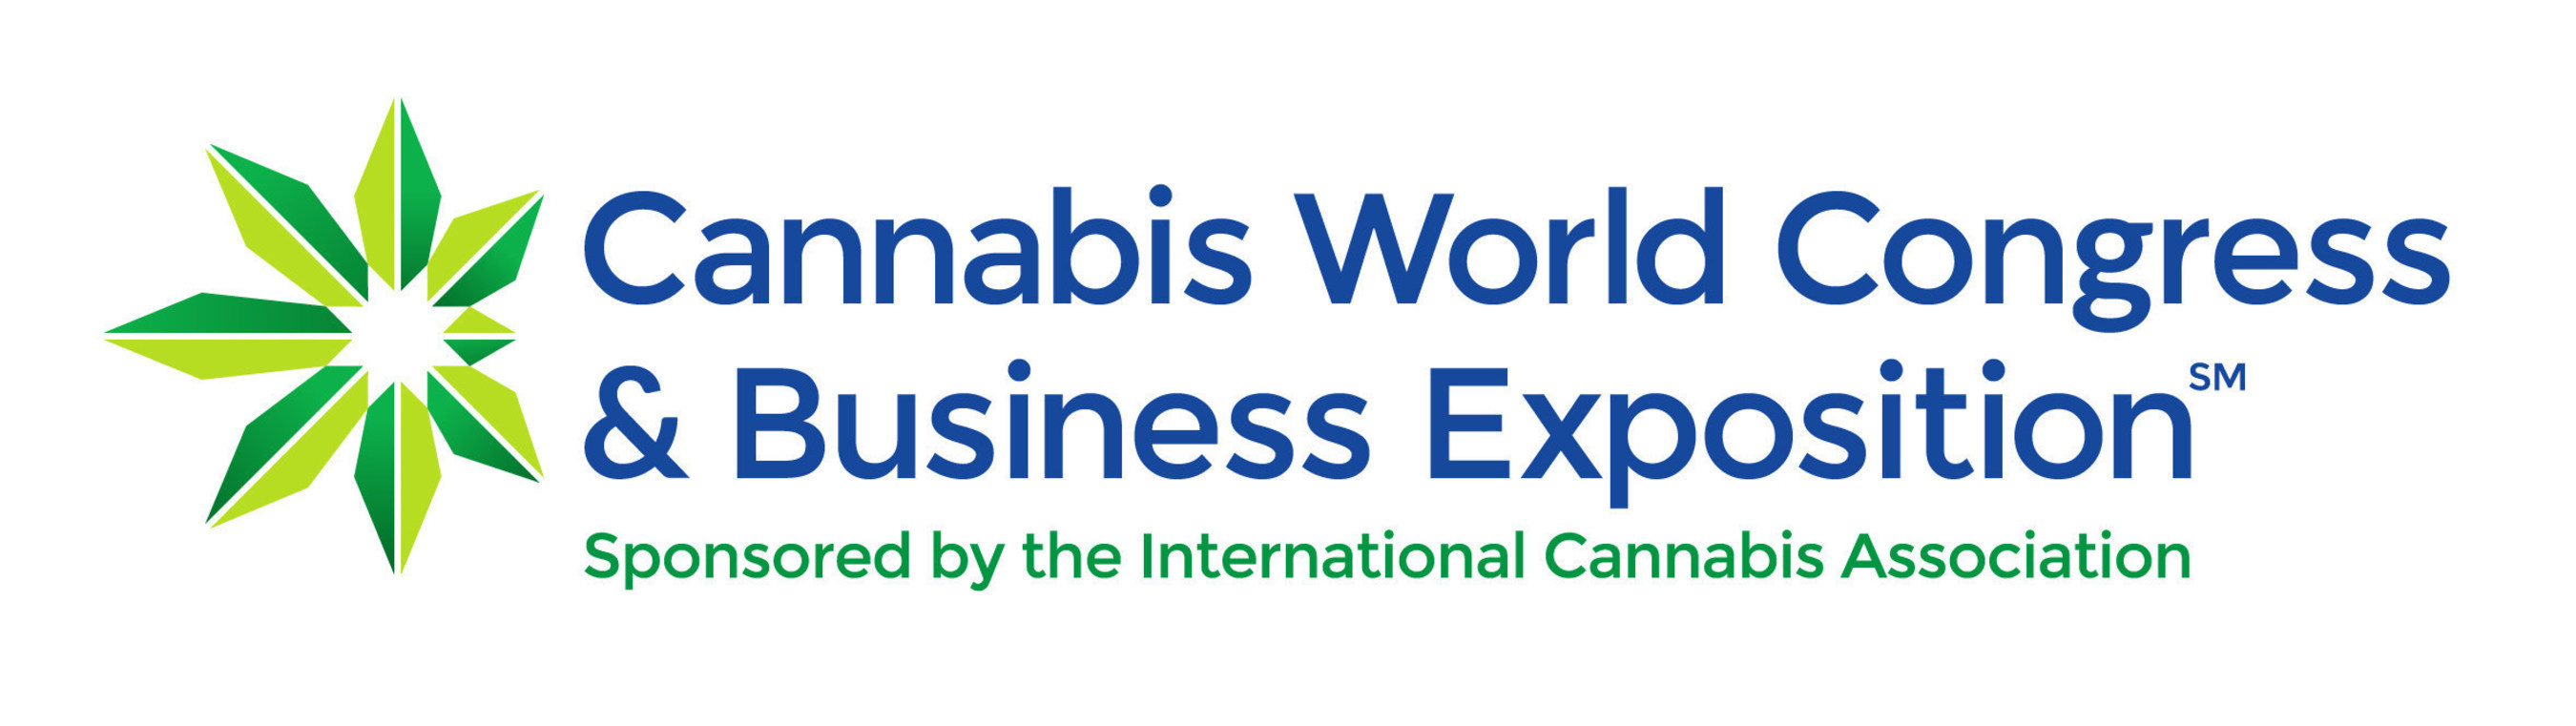 Cannabis World Congress & Business Expositions, www.cwcbexpo.com